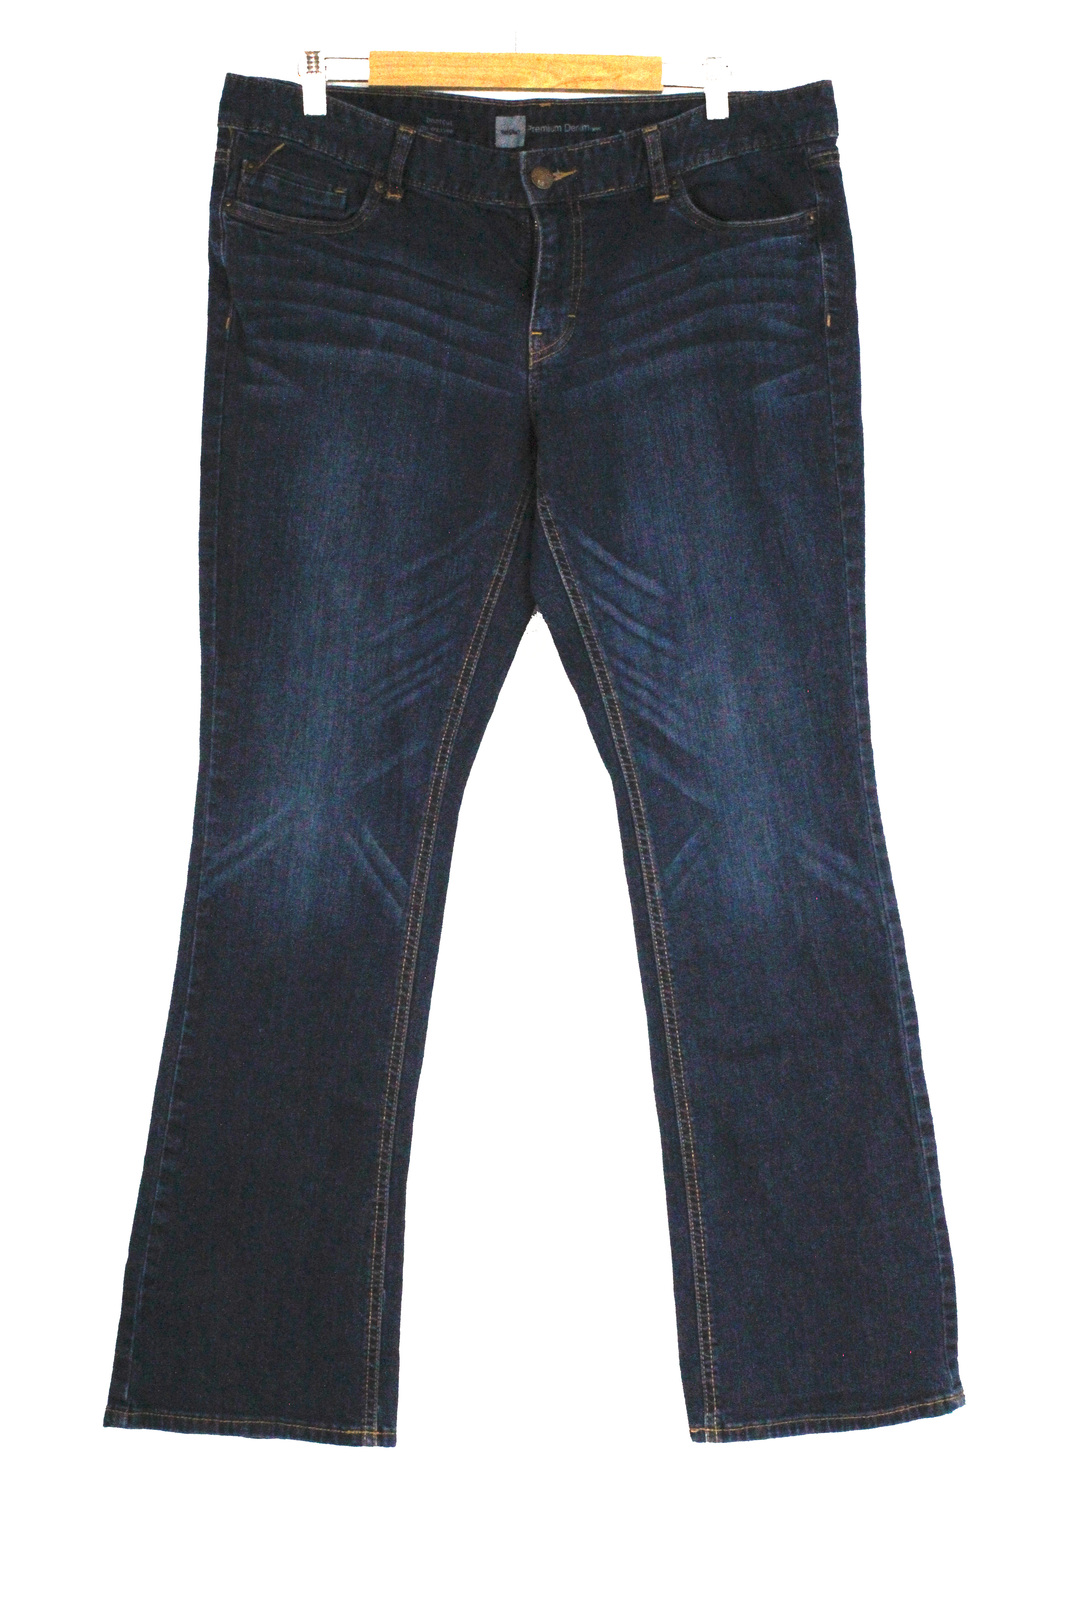 mossimo jeans